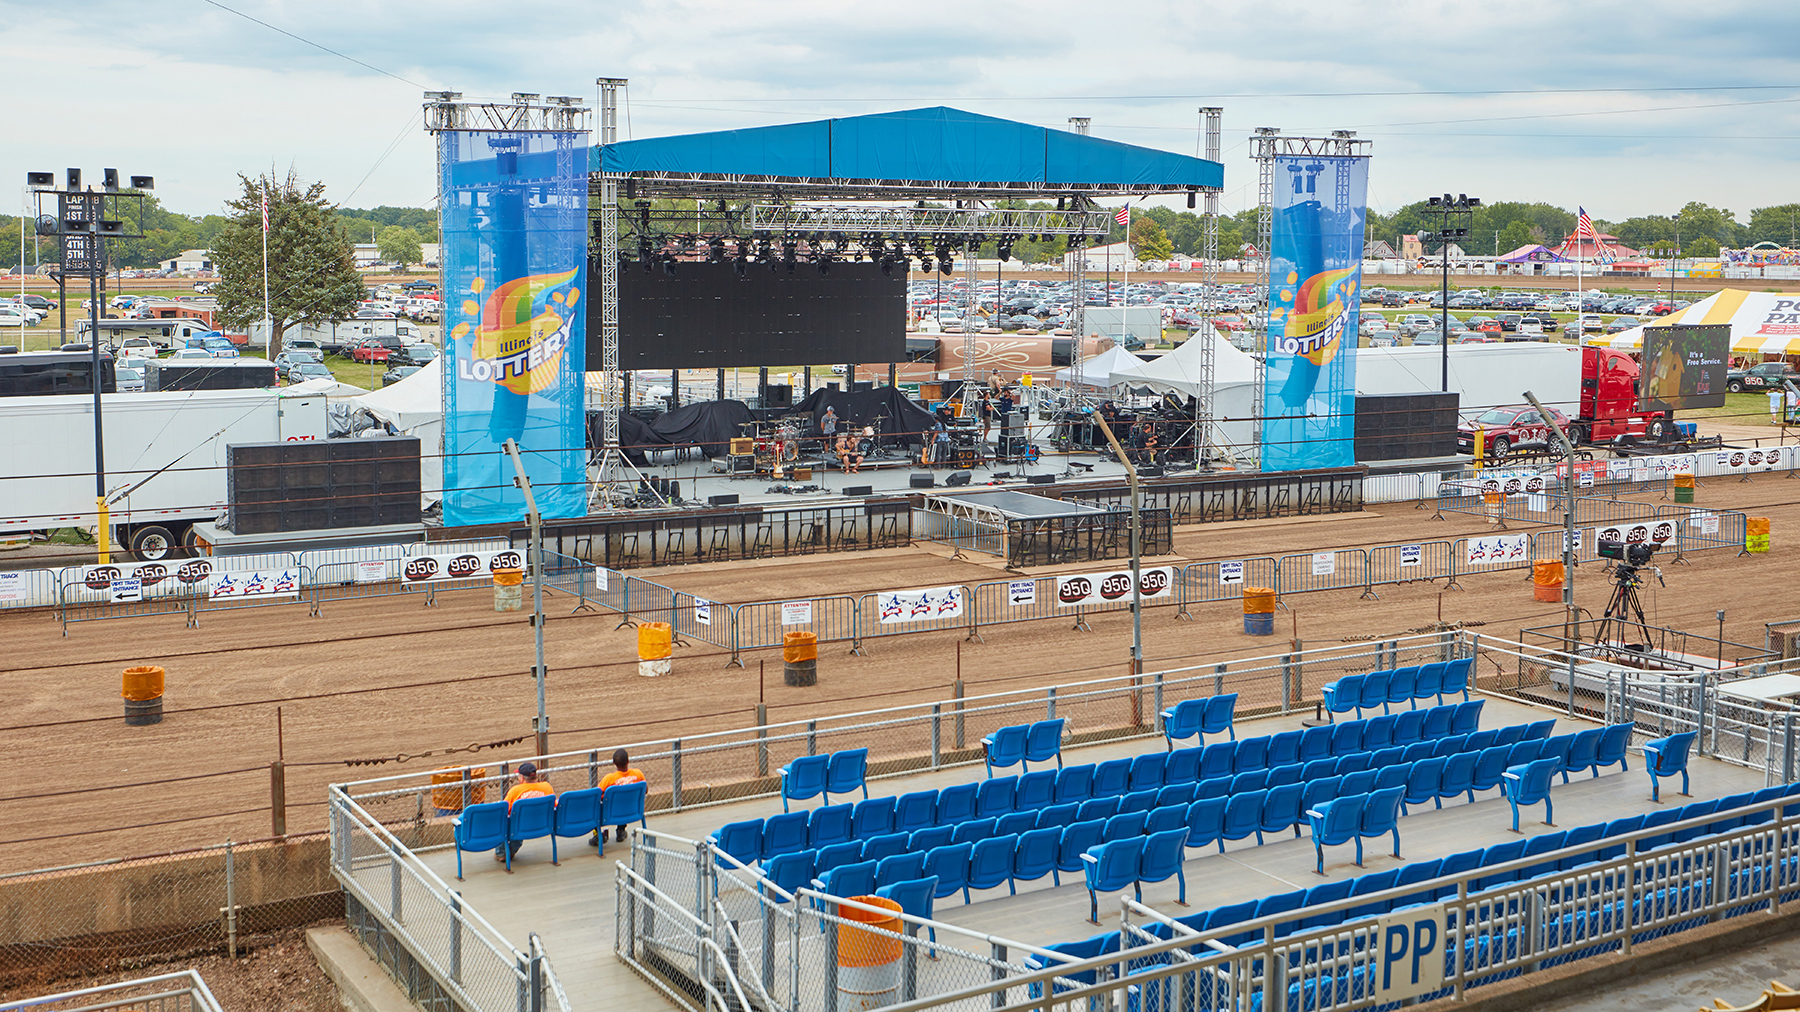 Mason Sound adds Dynacord Sonicue to the Mix at Illinois State Fair